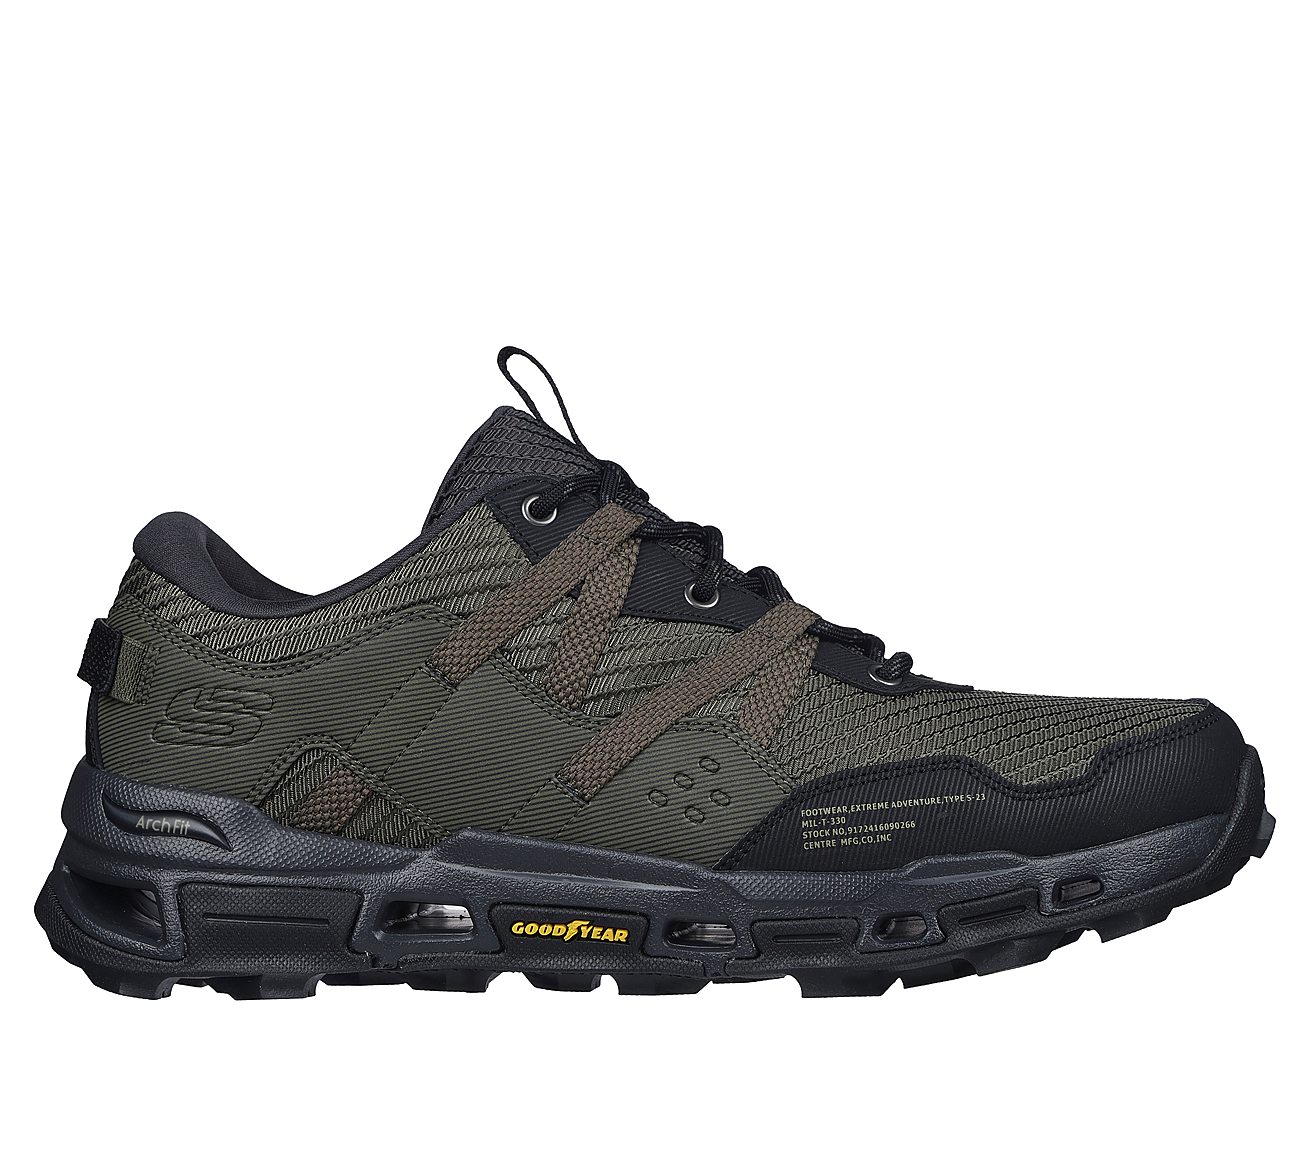 ARCH FIT GLIDE-STEP TRAIL, OLIVE/BLACK Footwear Lateral View